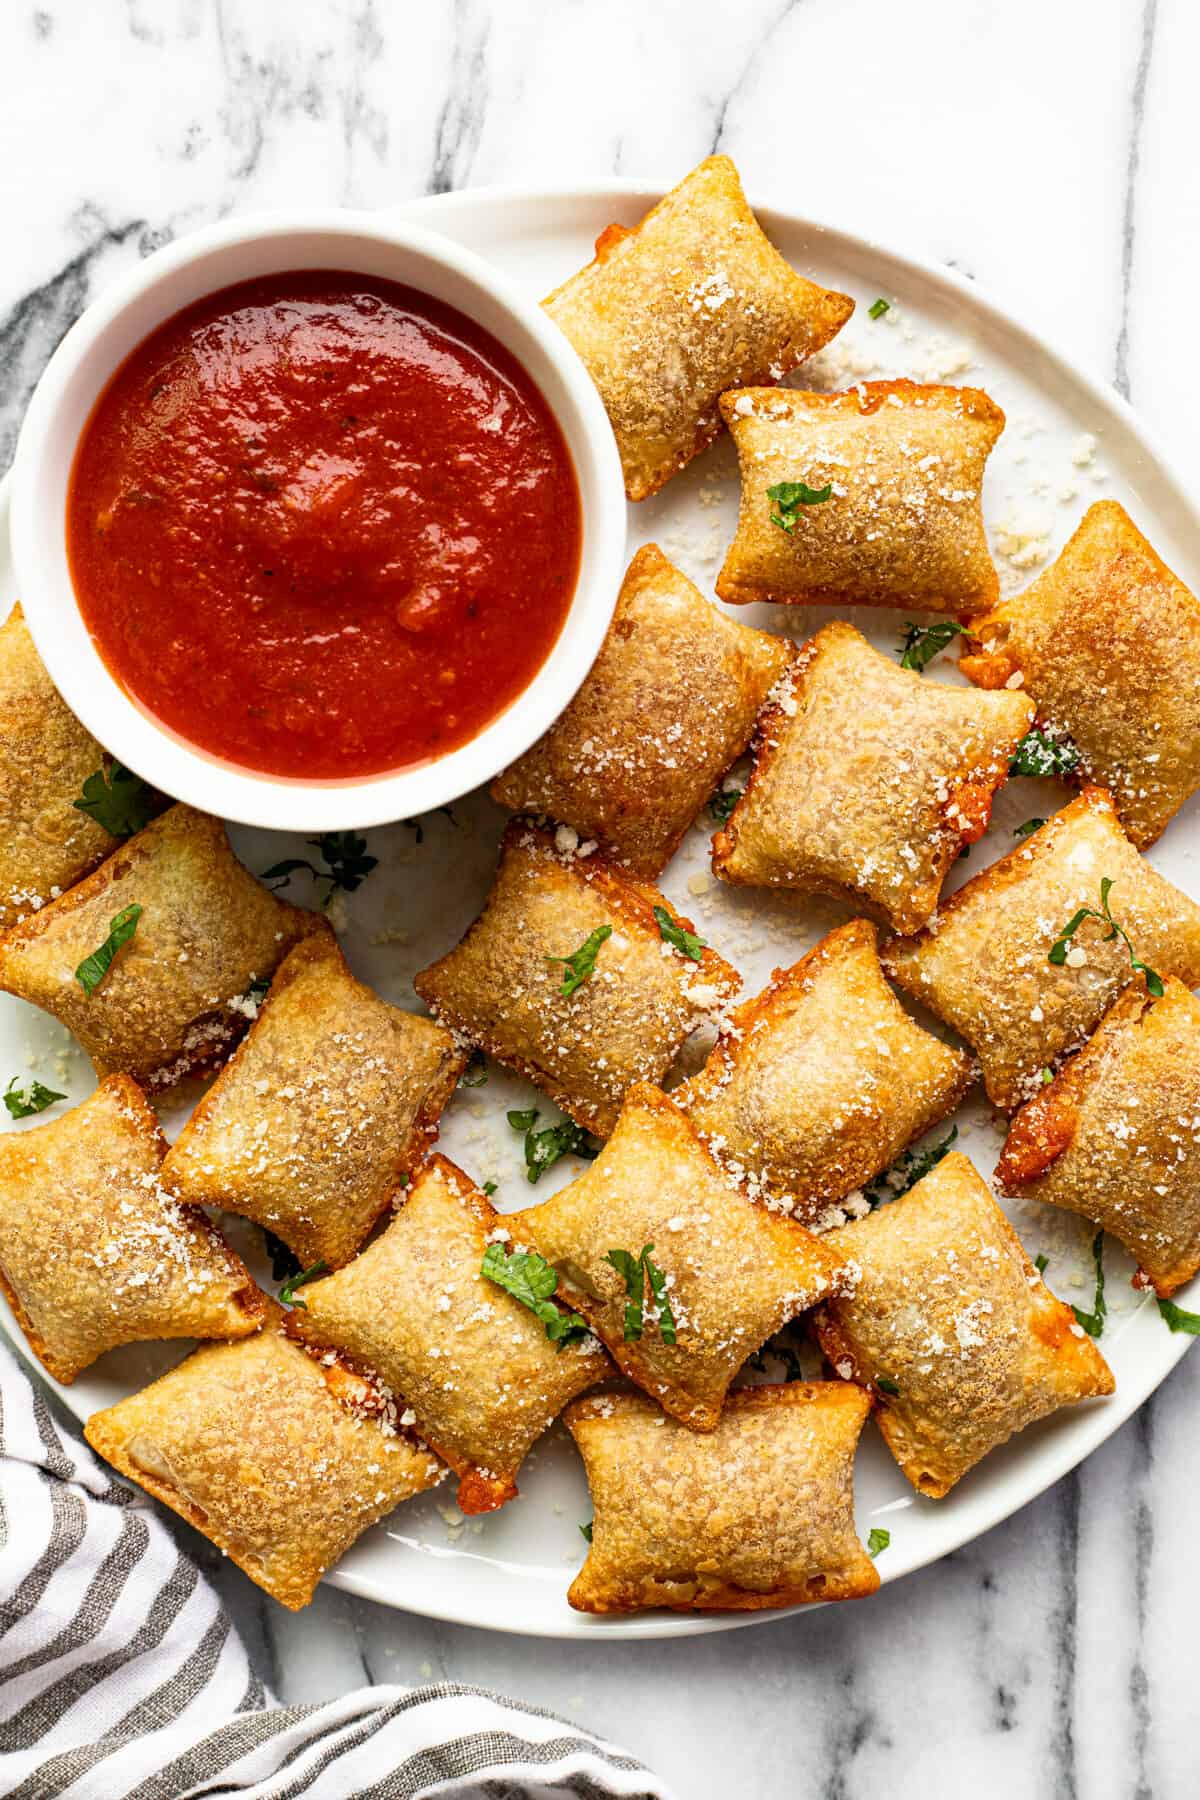 White plate with crispy pizza rolls garnished with Parmesan cheese next to a bowl of pizza sauce